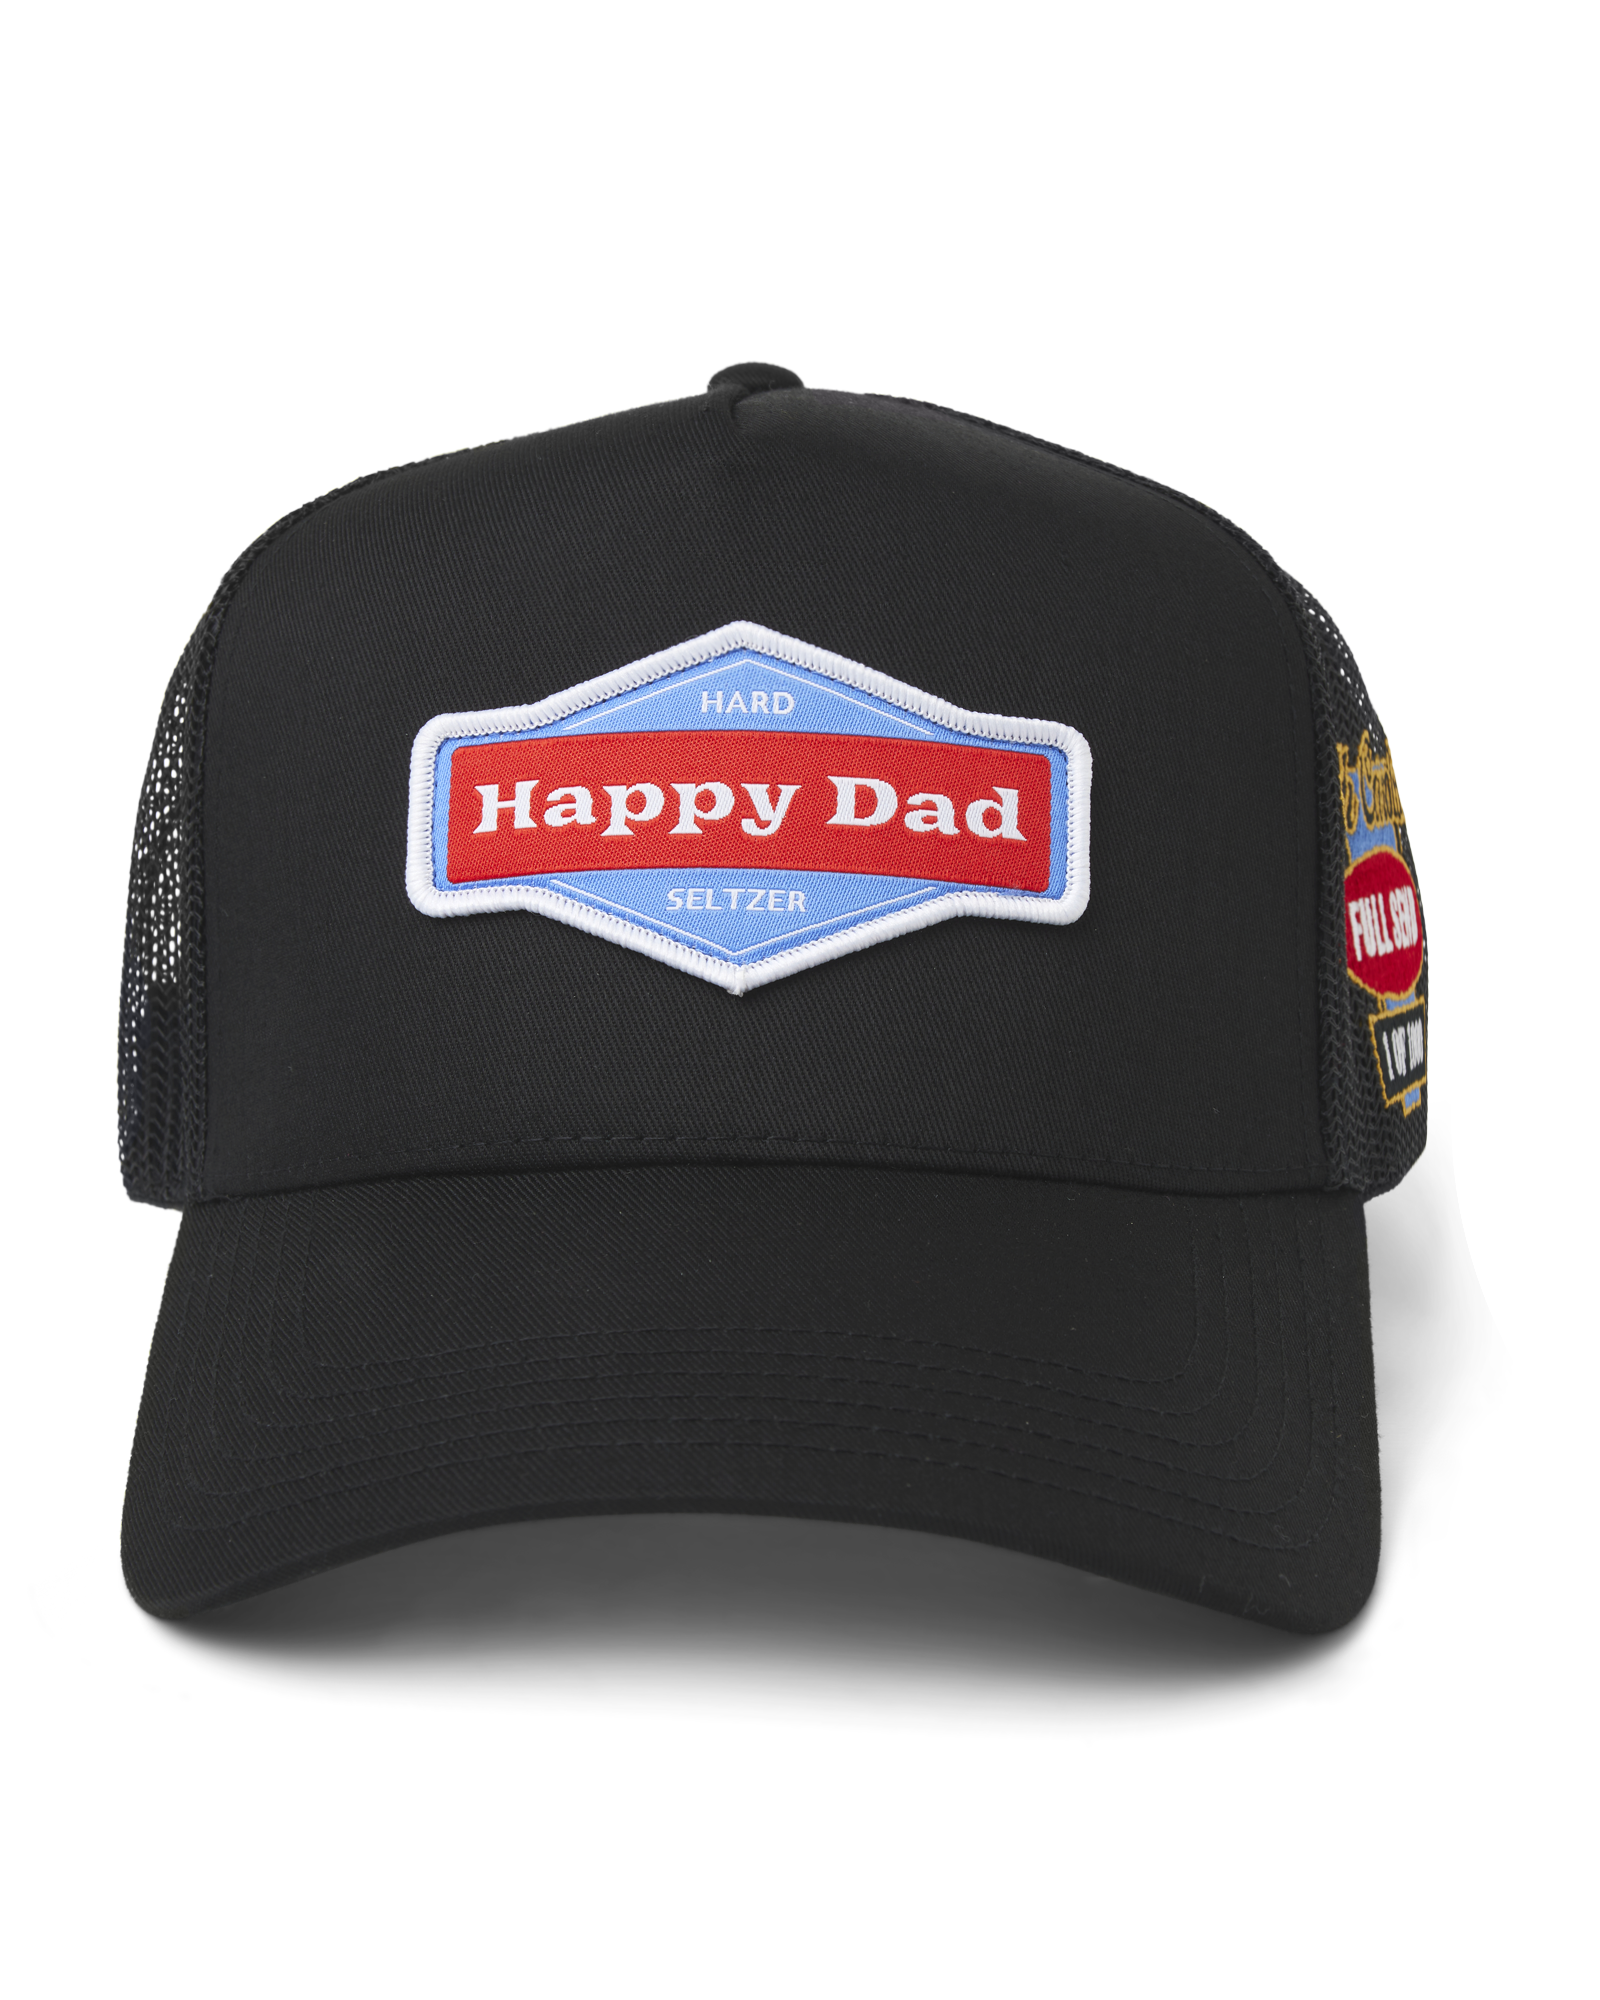 (Limited) New York - Happy Dad State Trucker Hat 1 of 1000